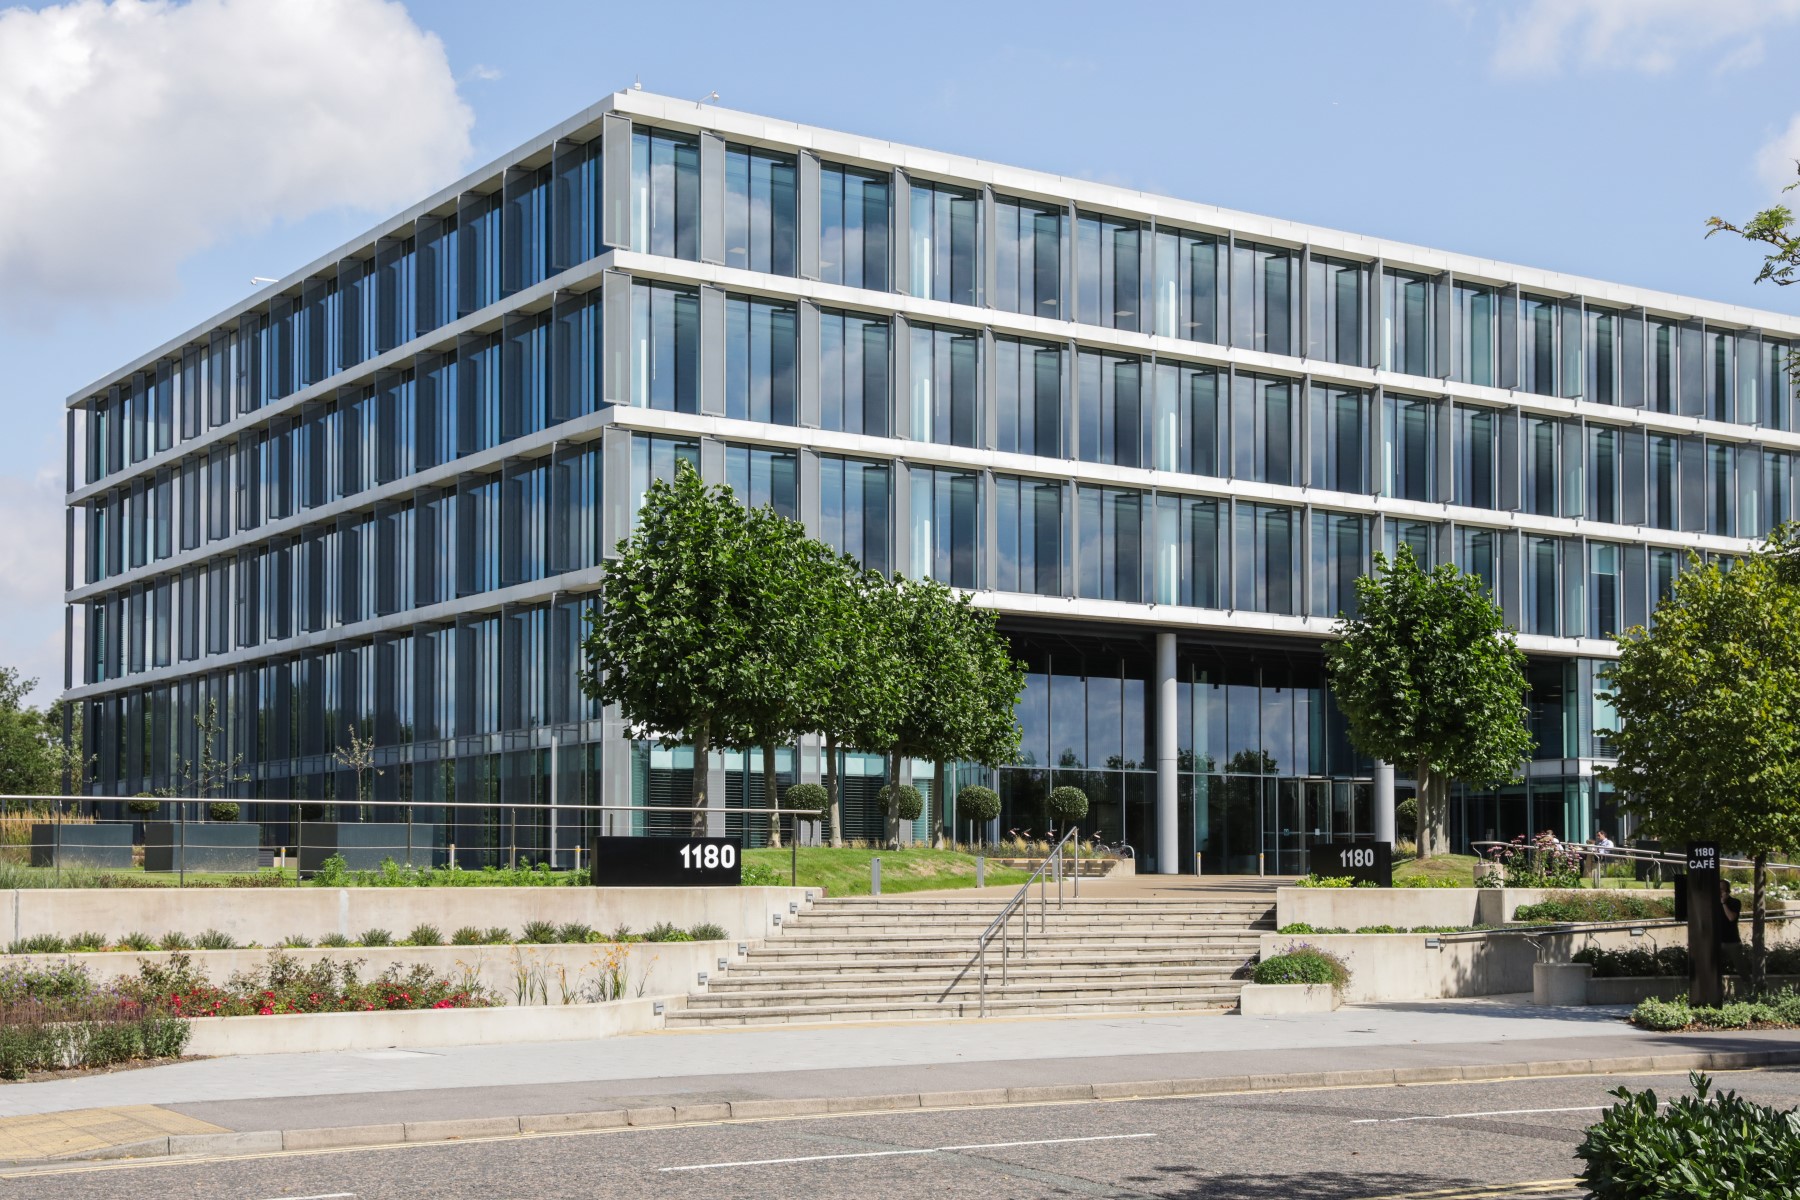 Frasers Property grows professional services cluster at Winnersh Triangle with two major deals completed totalling 40,000 sq ft